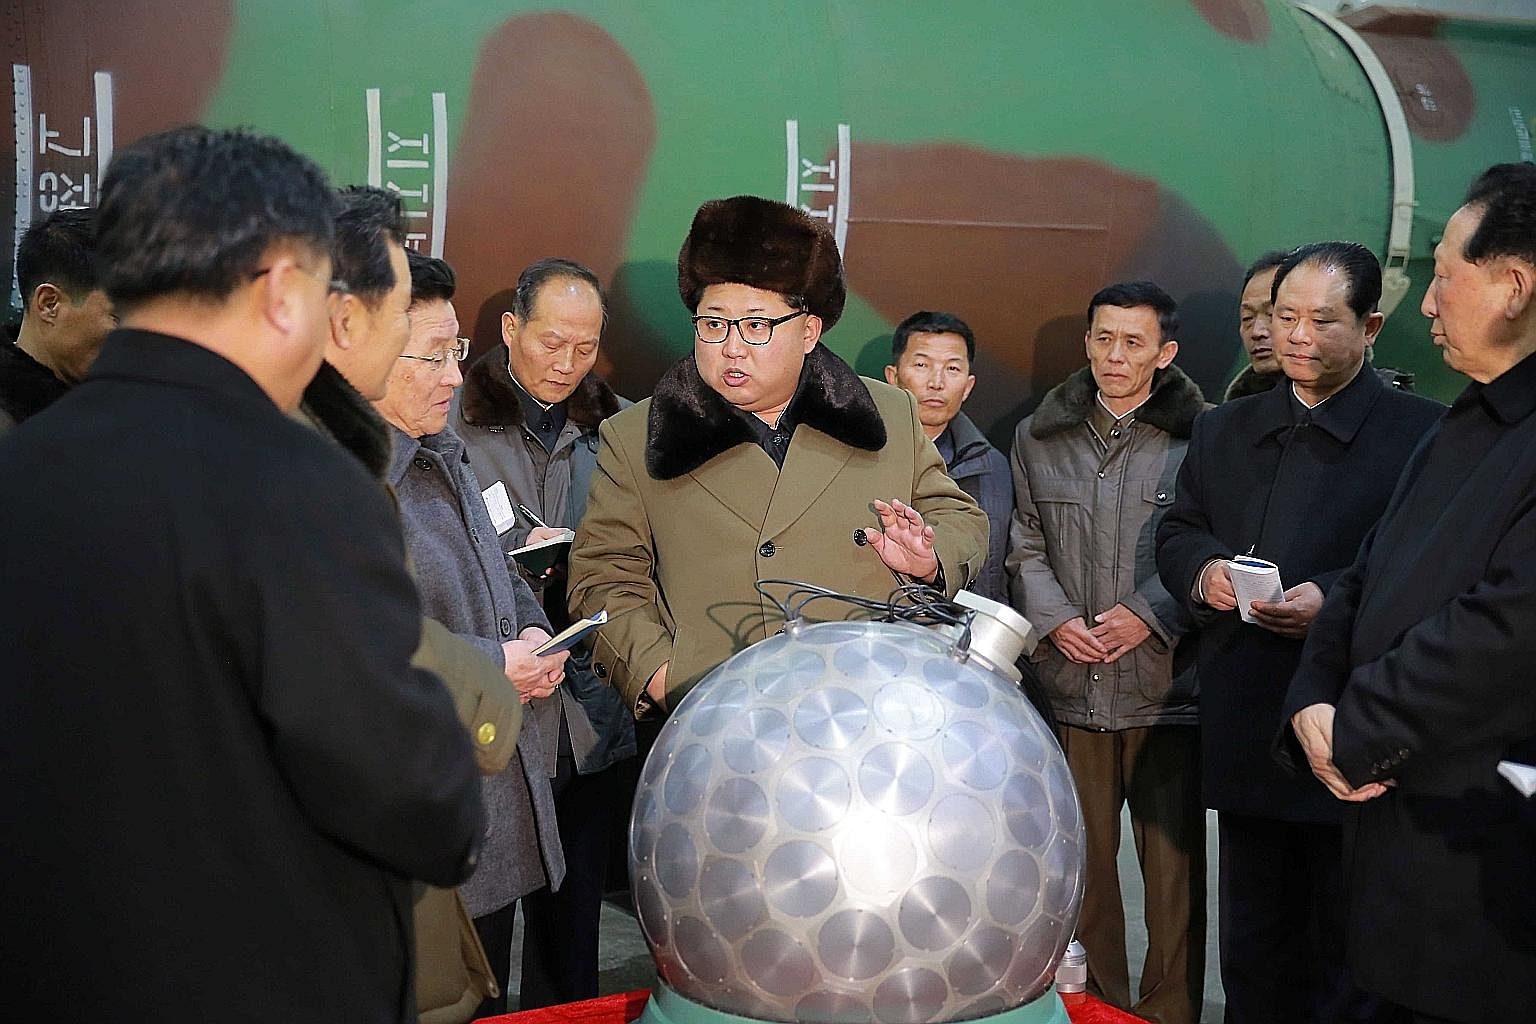 Above: An undated photo released by the Korean Central News Agency (KCNA), the state news agency of North Korea, showing North Korean leader Kim Jong Un (centre) talking with scientists and technicians involved in the research of nuclear weapons, at 